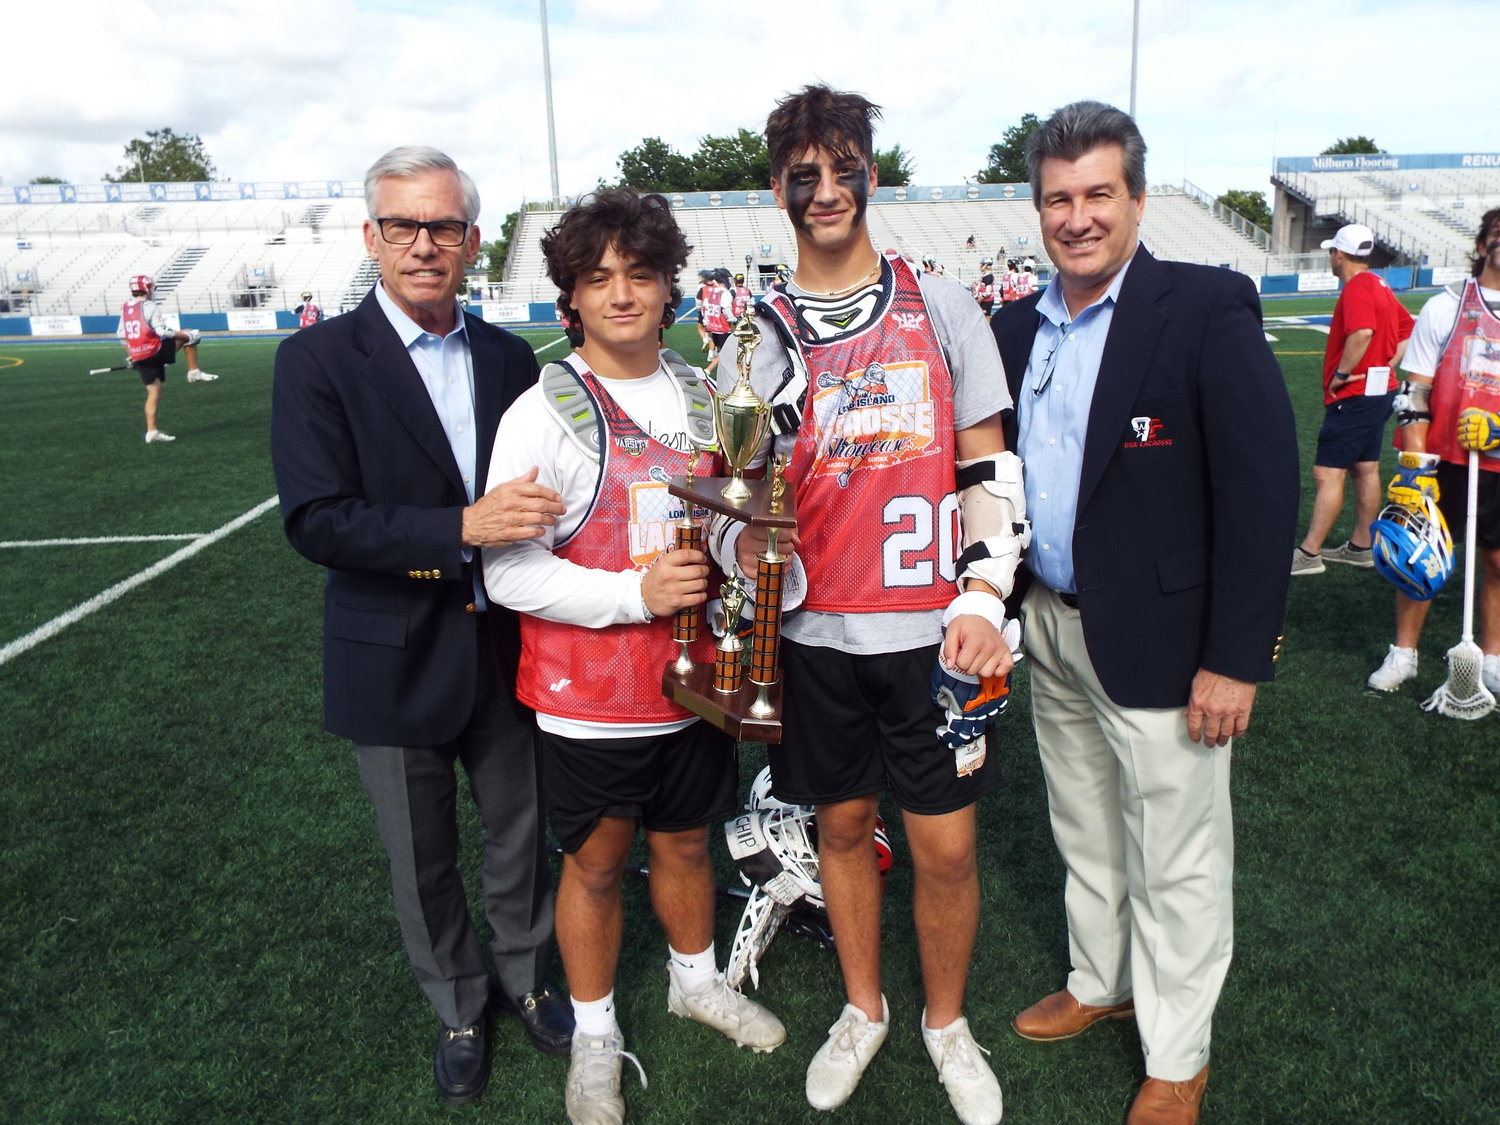 Drew Walendowski and Matthew Triolo received the Long Island Lacrosse Showcase Most Valuable Player Award from 1970s high school and college lacrosse stars James C. Metzger and Vincent J. Sombrotto. From left: Metzger, Walendowski, Triolo and Sombrotto.